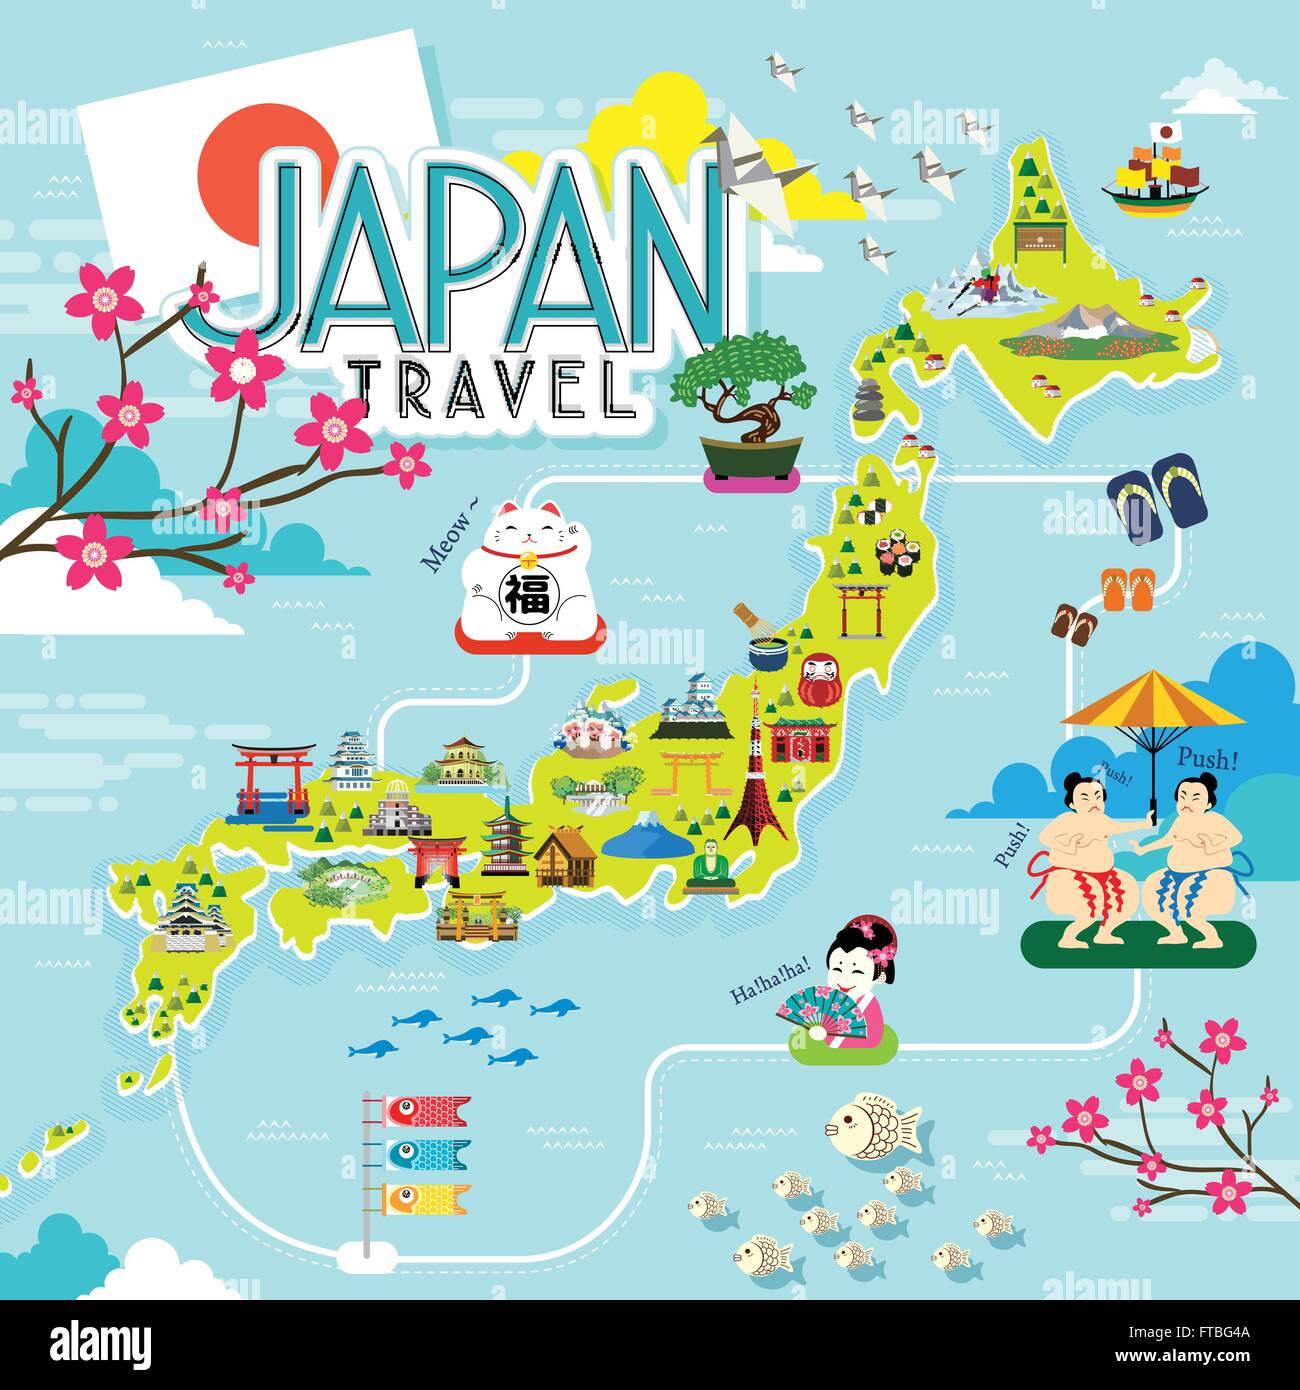 Japan travel map with lovely famous attractions Stock Vector